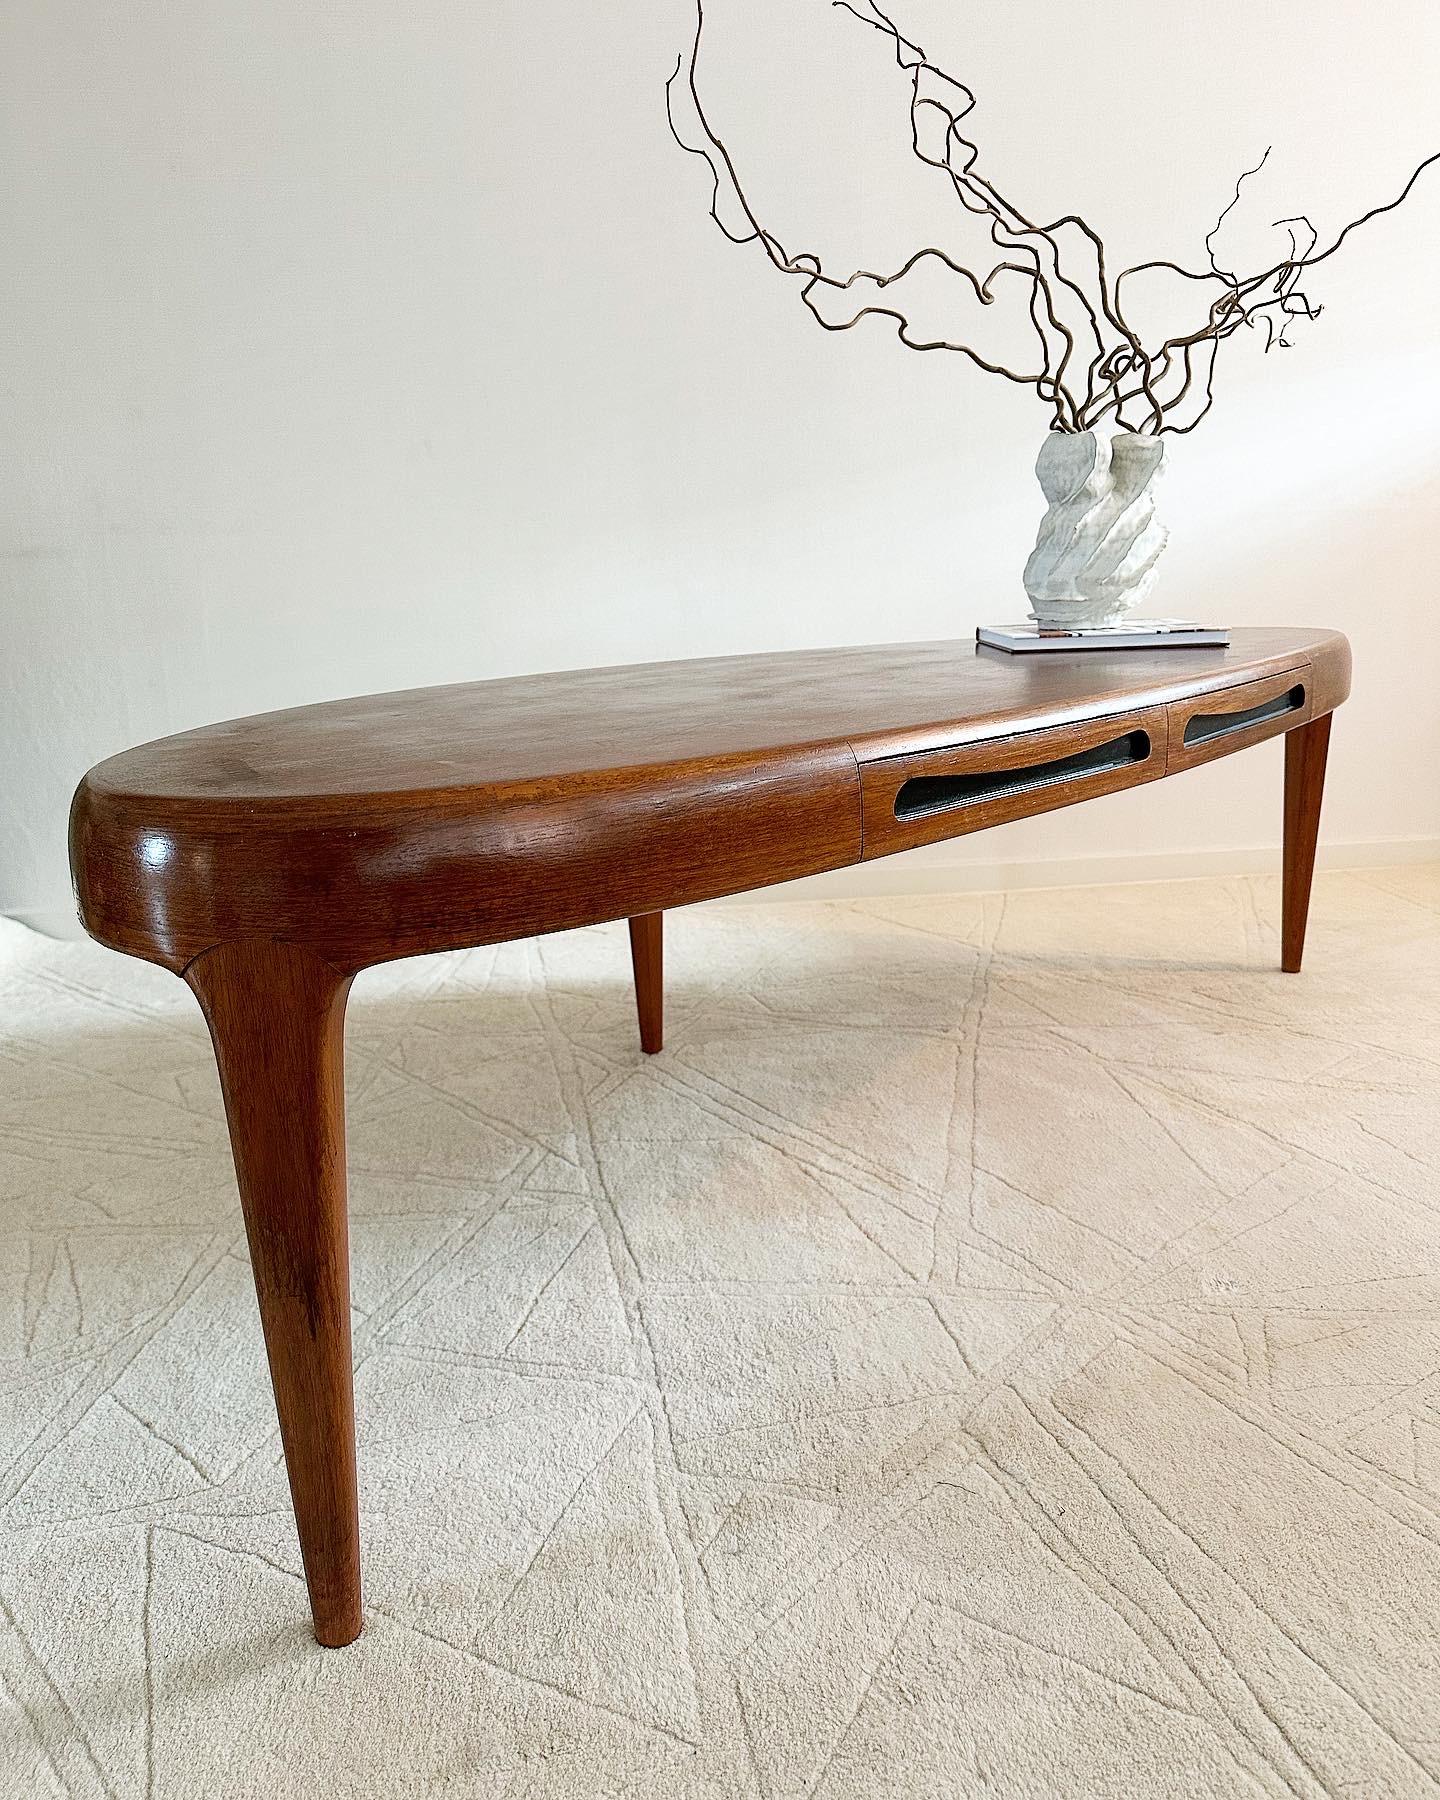 Wonderful coffee table by Johannes Andersén for Trensum, Denmark.


”With the rise of Danish furniture becomining internationally recognised, Johannes Andersén was a reputable component in Danish Design. Like many of the before mentioned designers